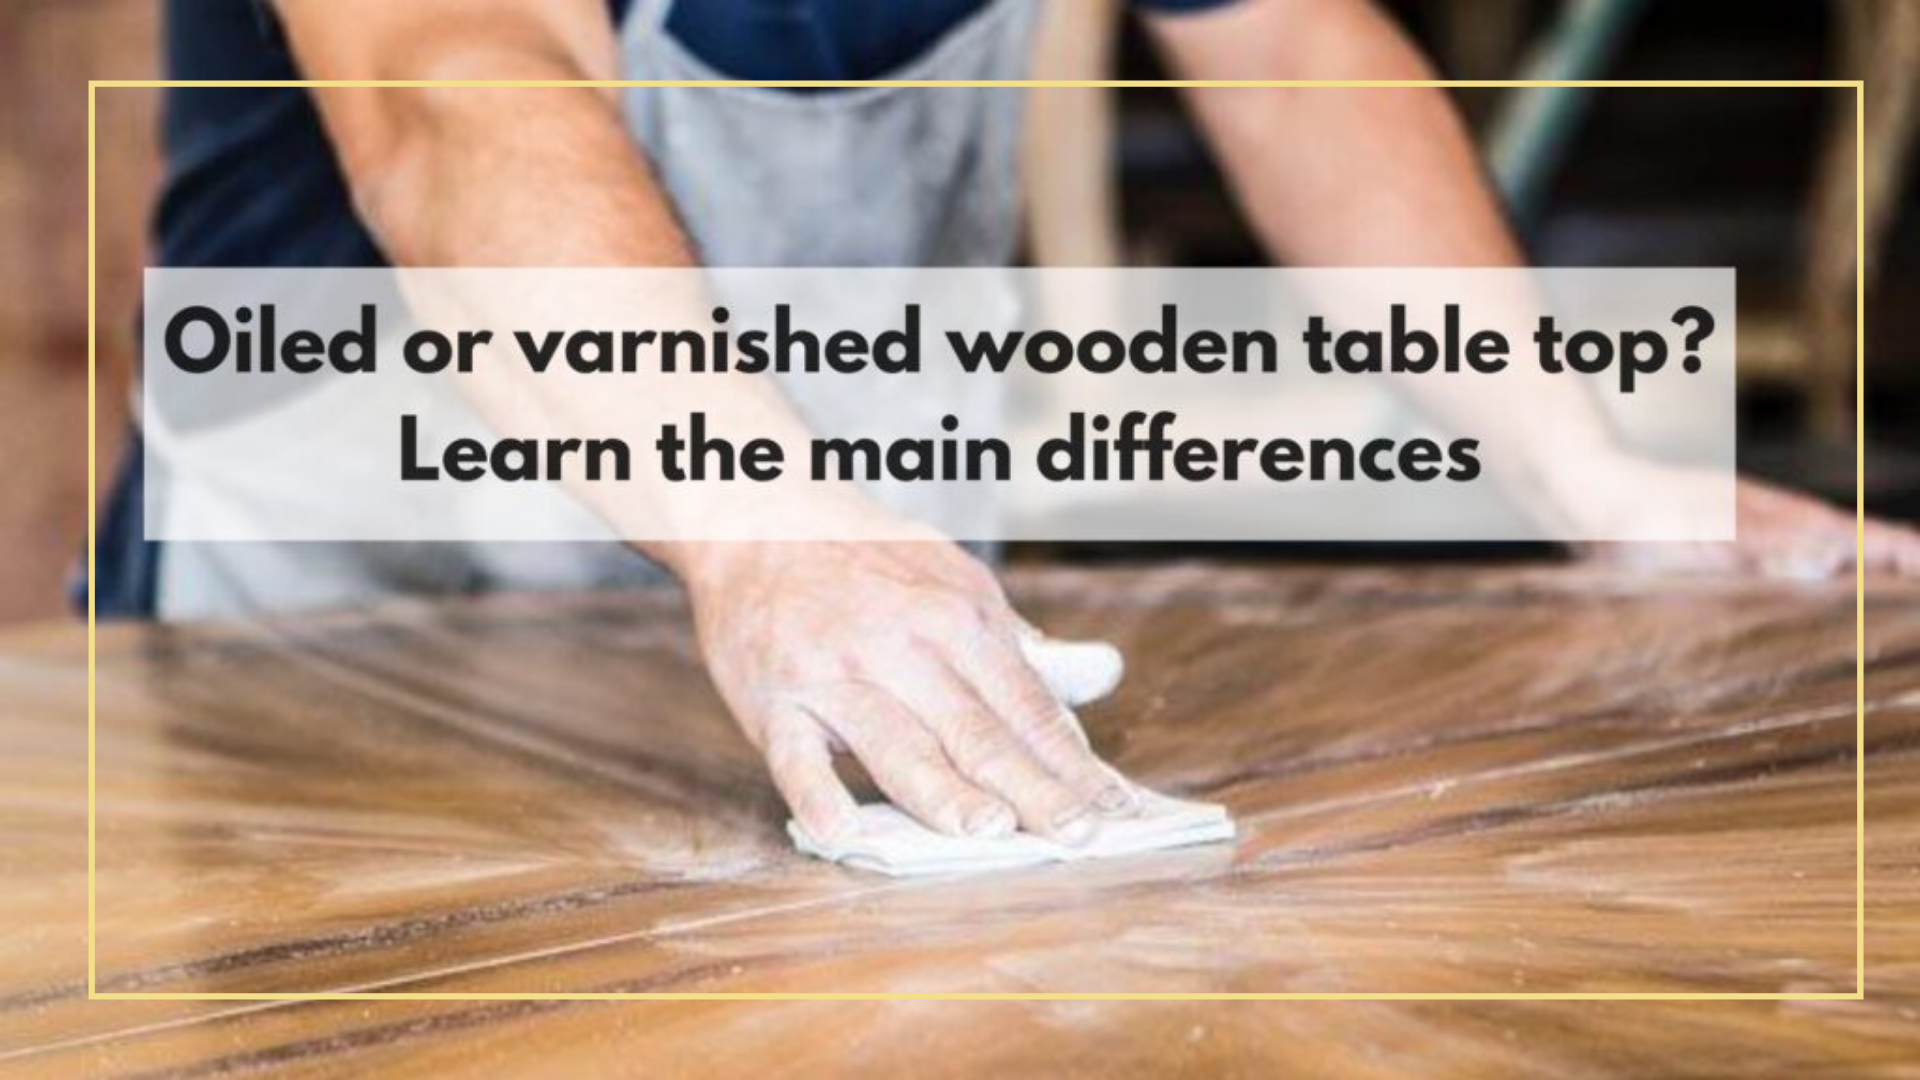 Oiled or varnished wooden table top_ Learn the main differences